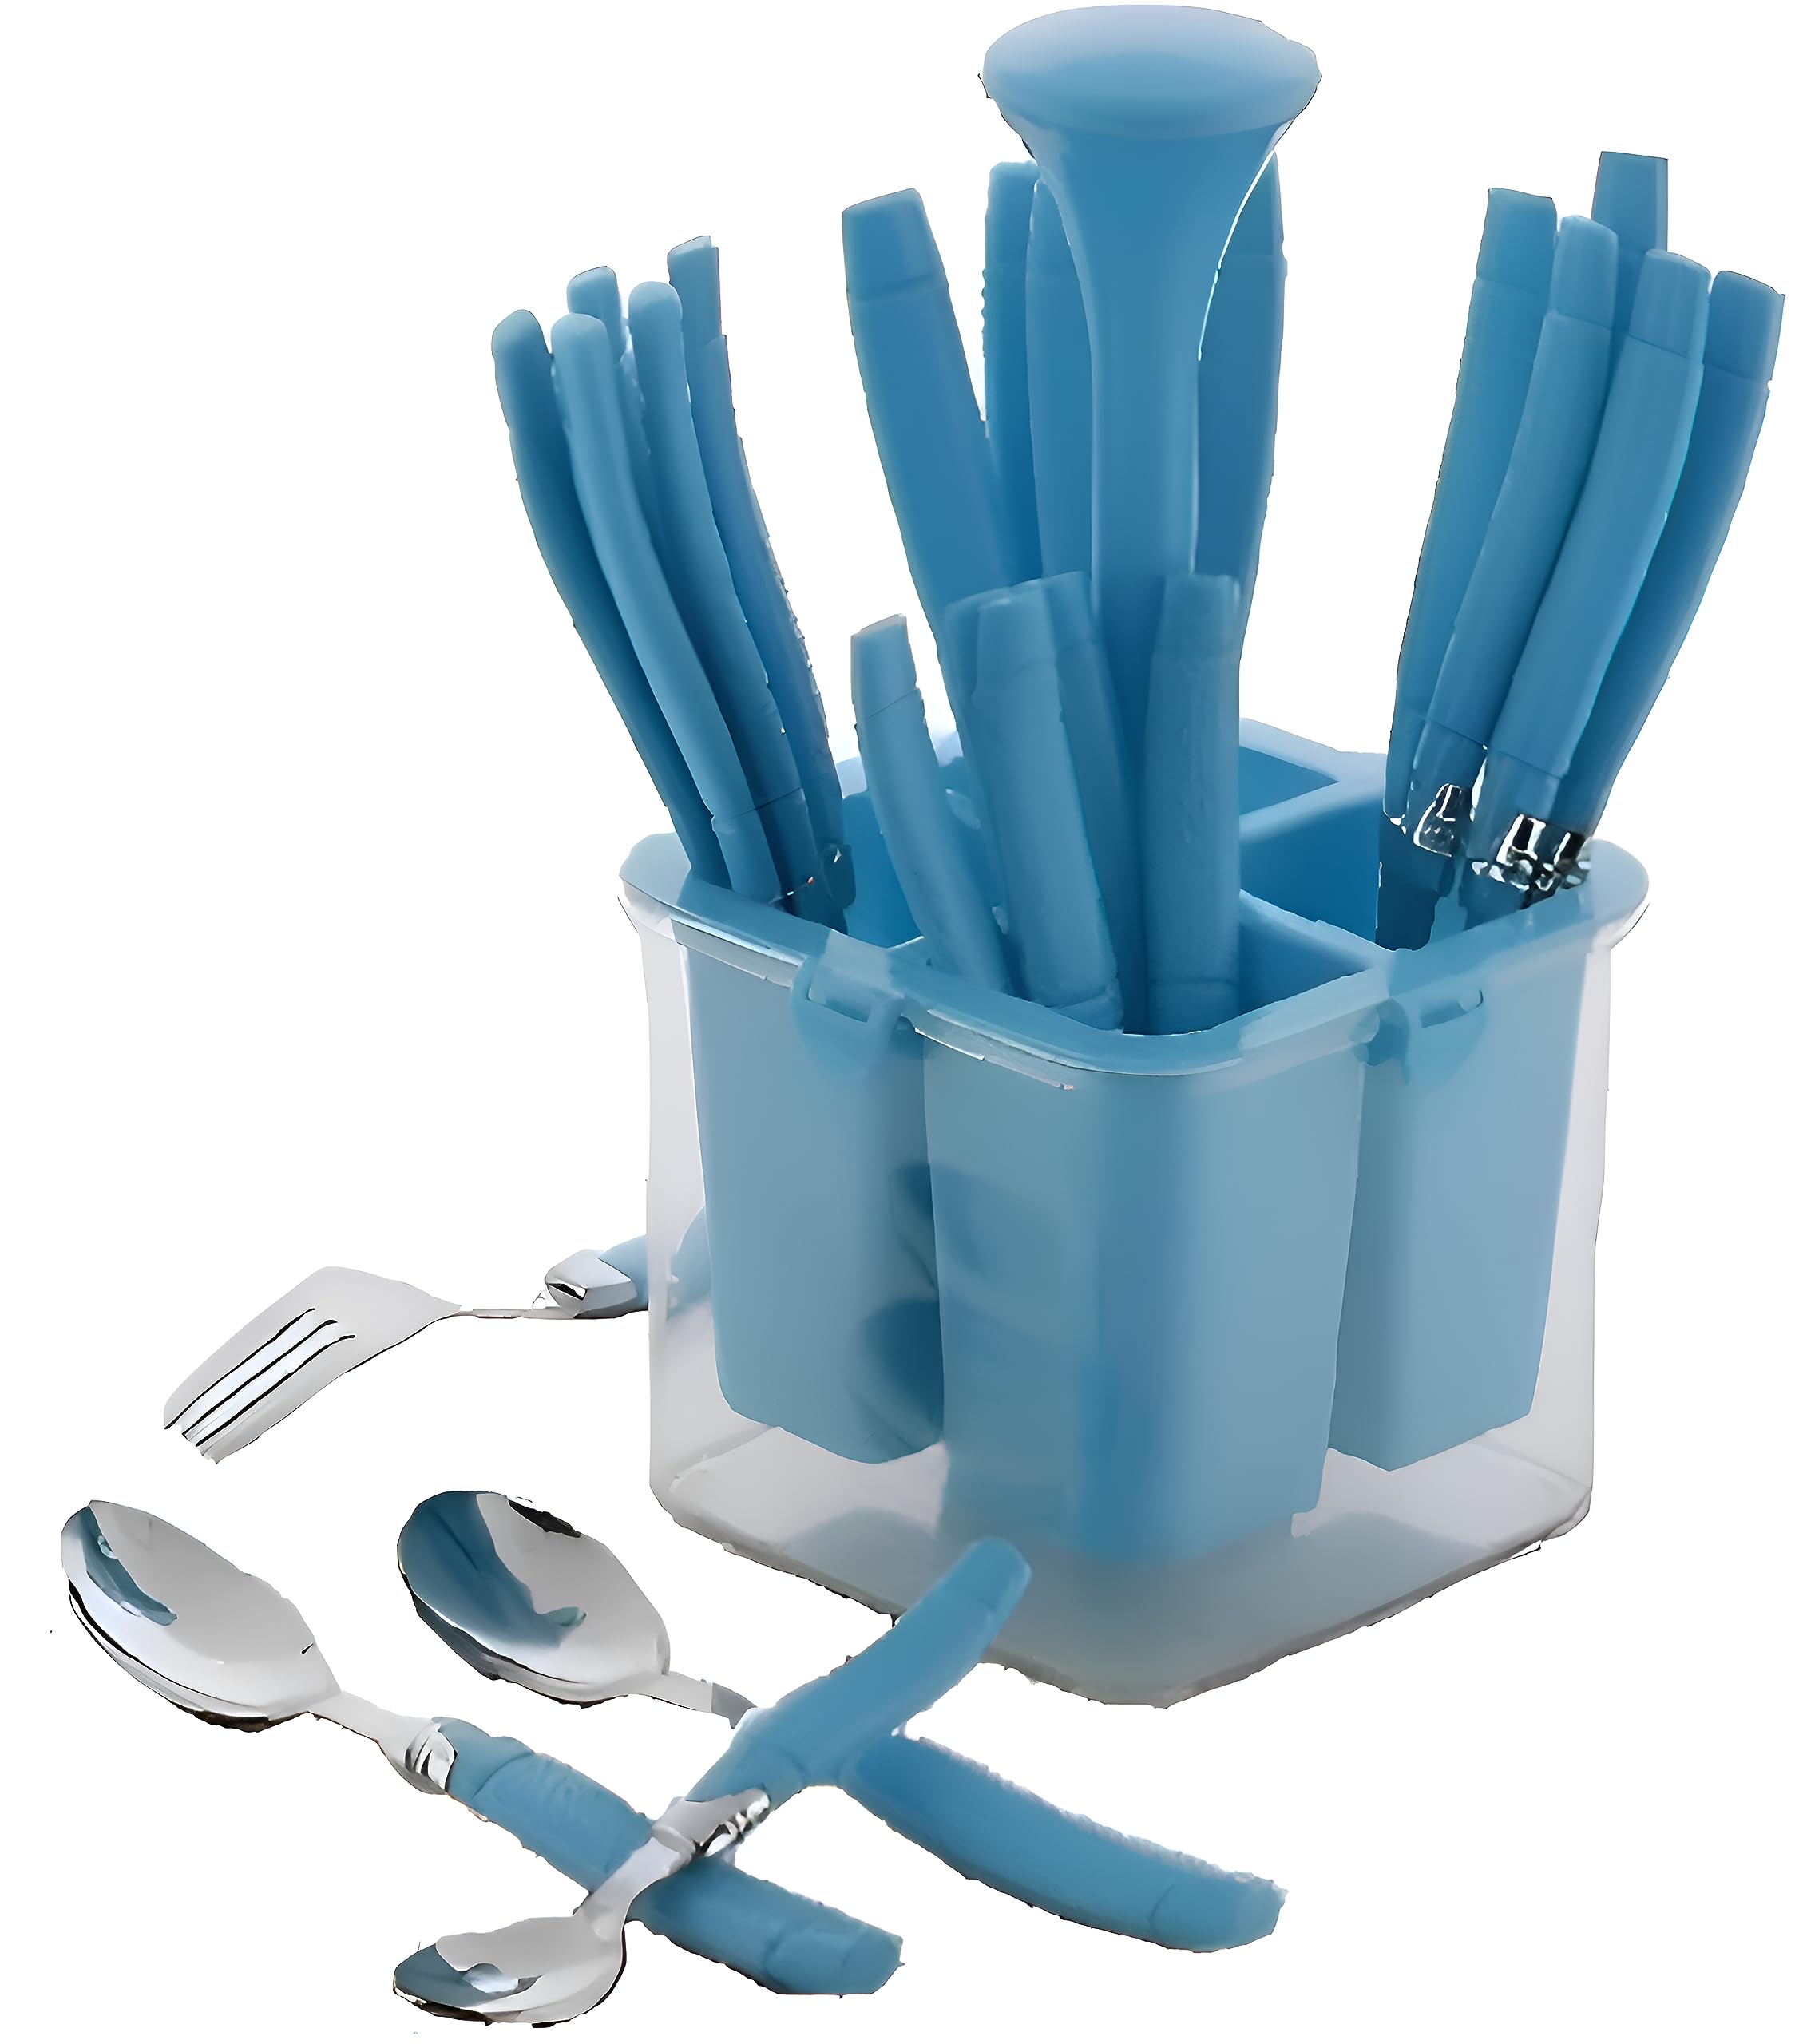 Plantex Oppo Cutlery Set with Storage Box/Spoon Set/Spoon Stand for Kitchen and Dining (24 Pieces - Blue)